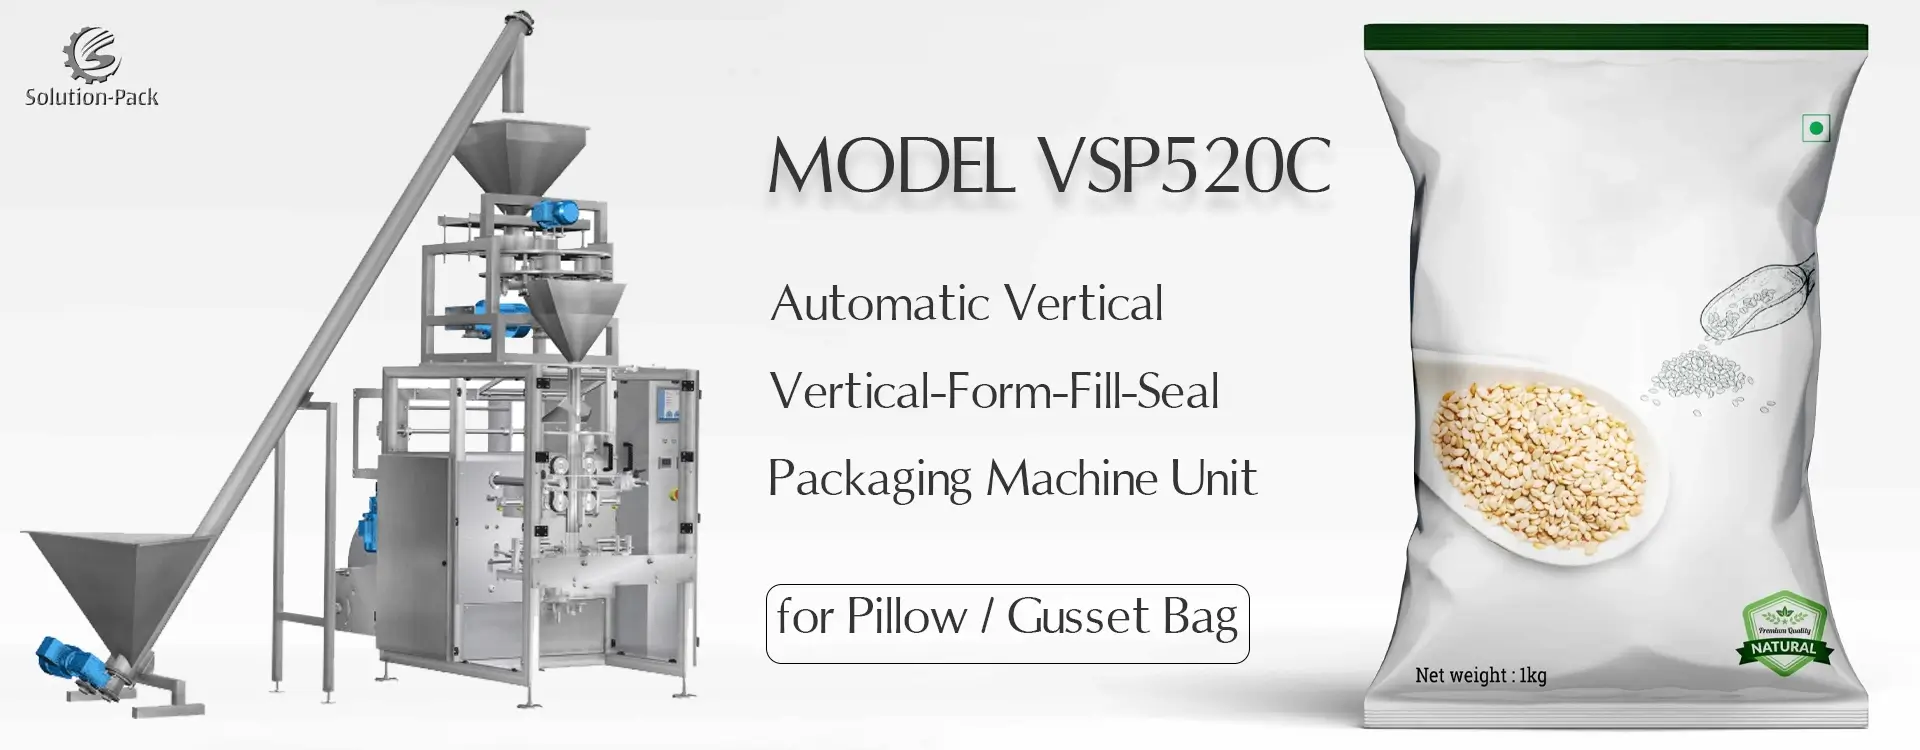 Model VSP520C Automatic Vertical Packaging Machine Unit | Solution-Pack (Heading Banner Picture)